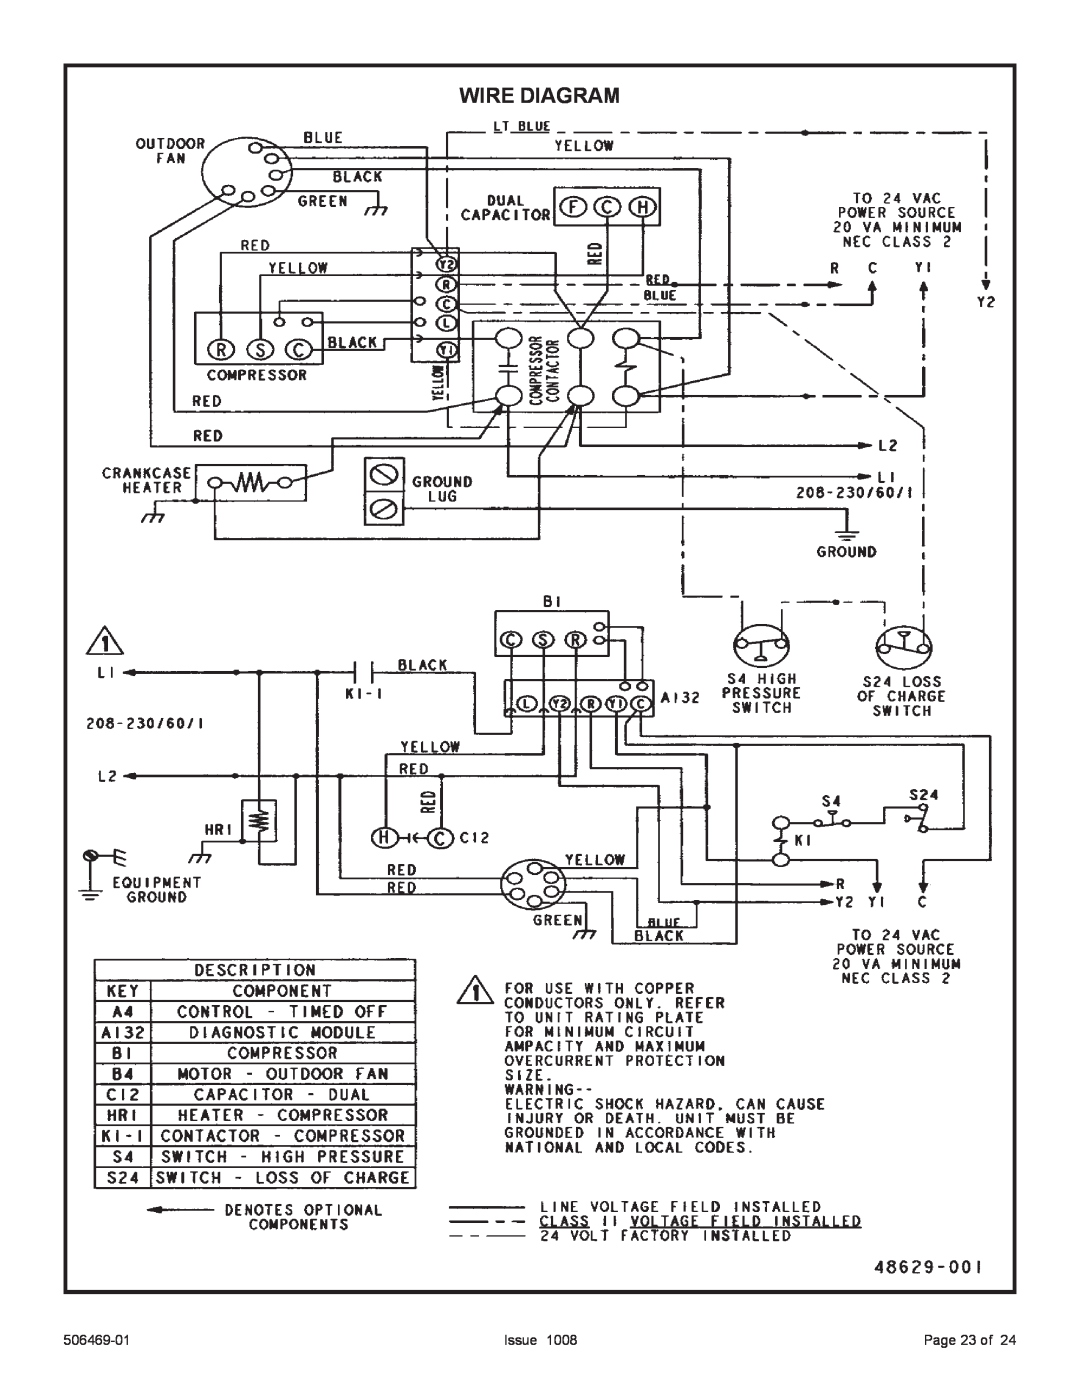 Allied Air Enterprises 4AC18LT manual Wire Diagram, Issue, Page 23 of, 506469-01 